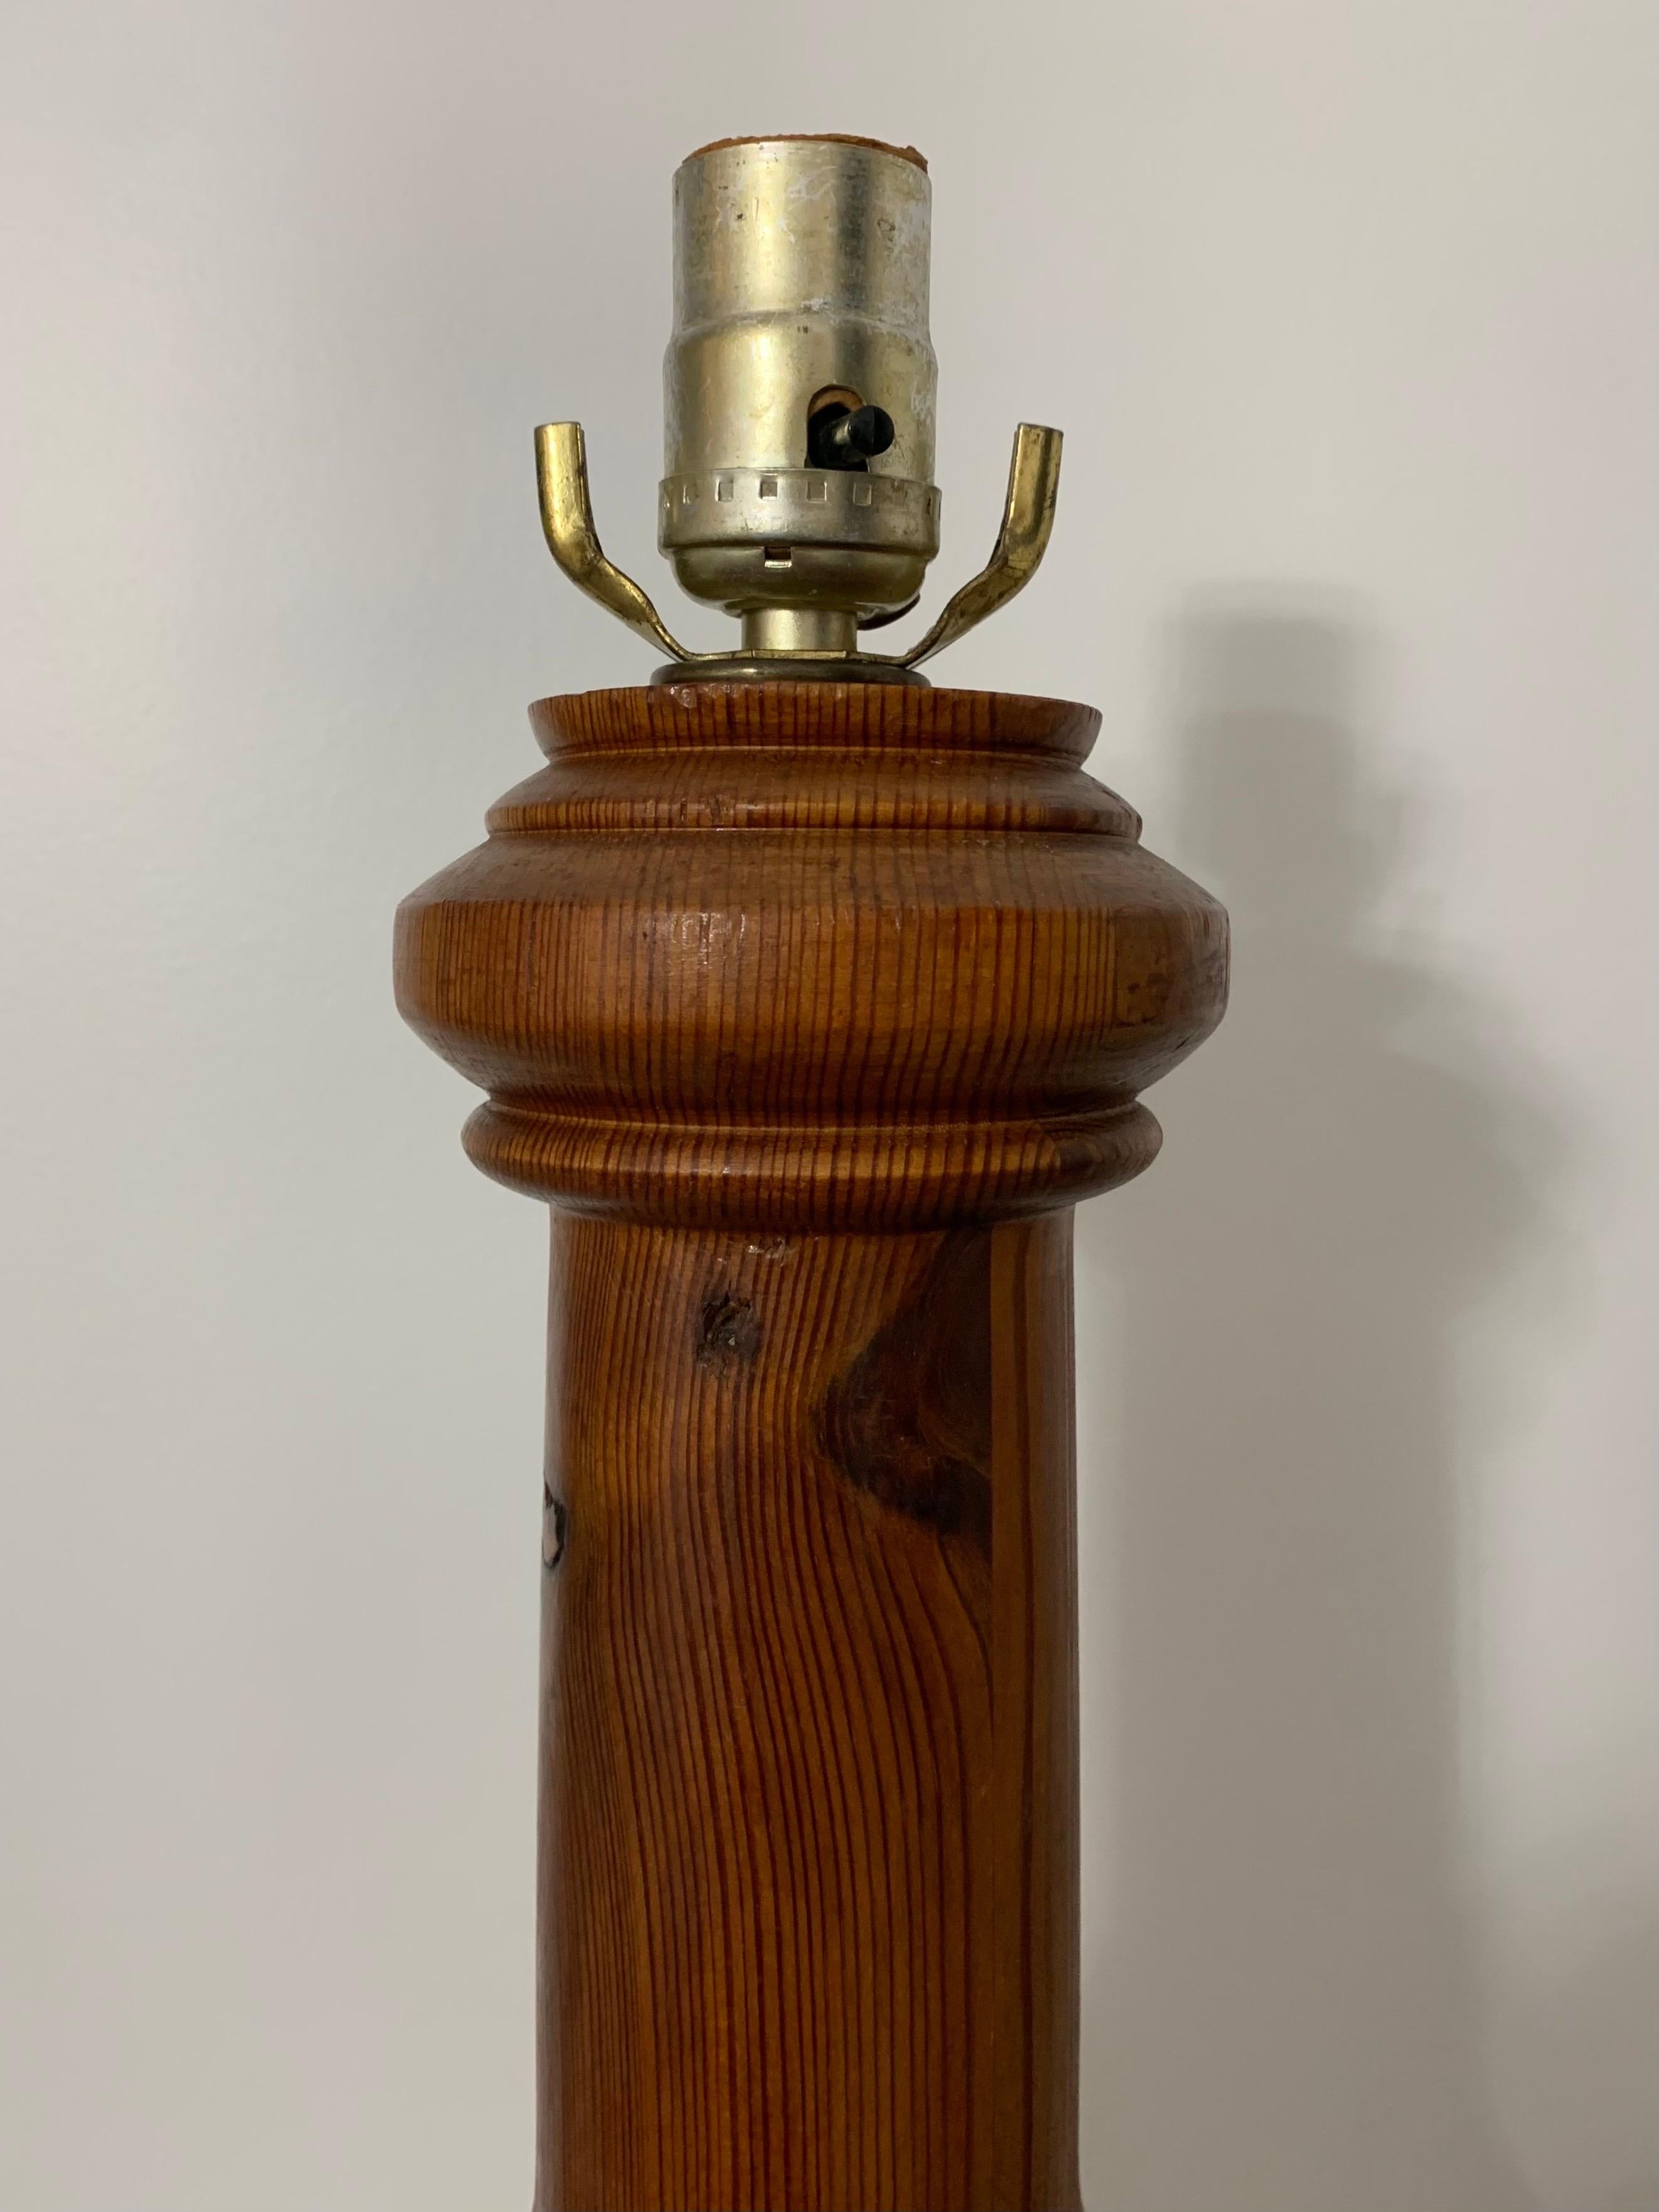 American Craft, Reclaimed Turned Wood Table Lamp, 1970s In Good Condition For Sale In Boynton Beach, FL